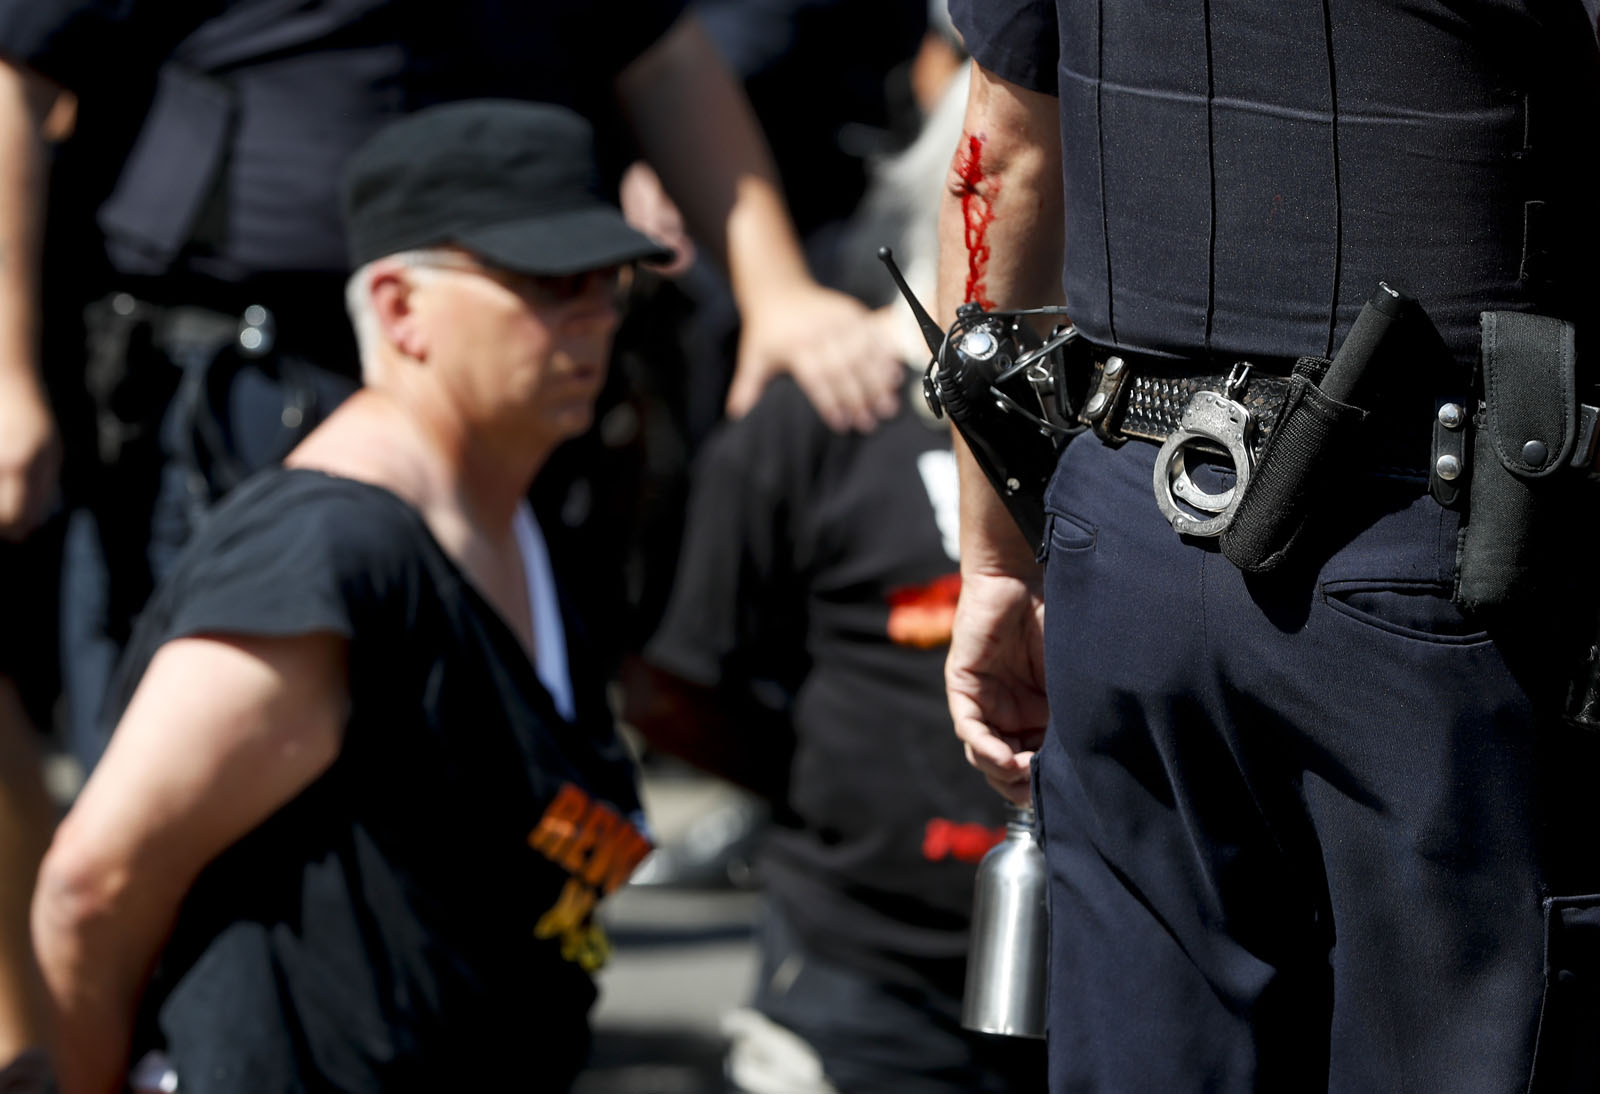 Blood runs down the arm of a police officer after a clash with protesters, Wednesday, July 20, 2016, in Cleveland, during the third day of the Republican convention. (AP Photo/John Minchillo)